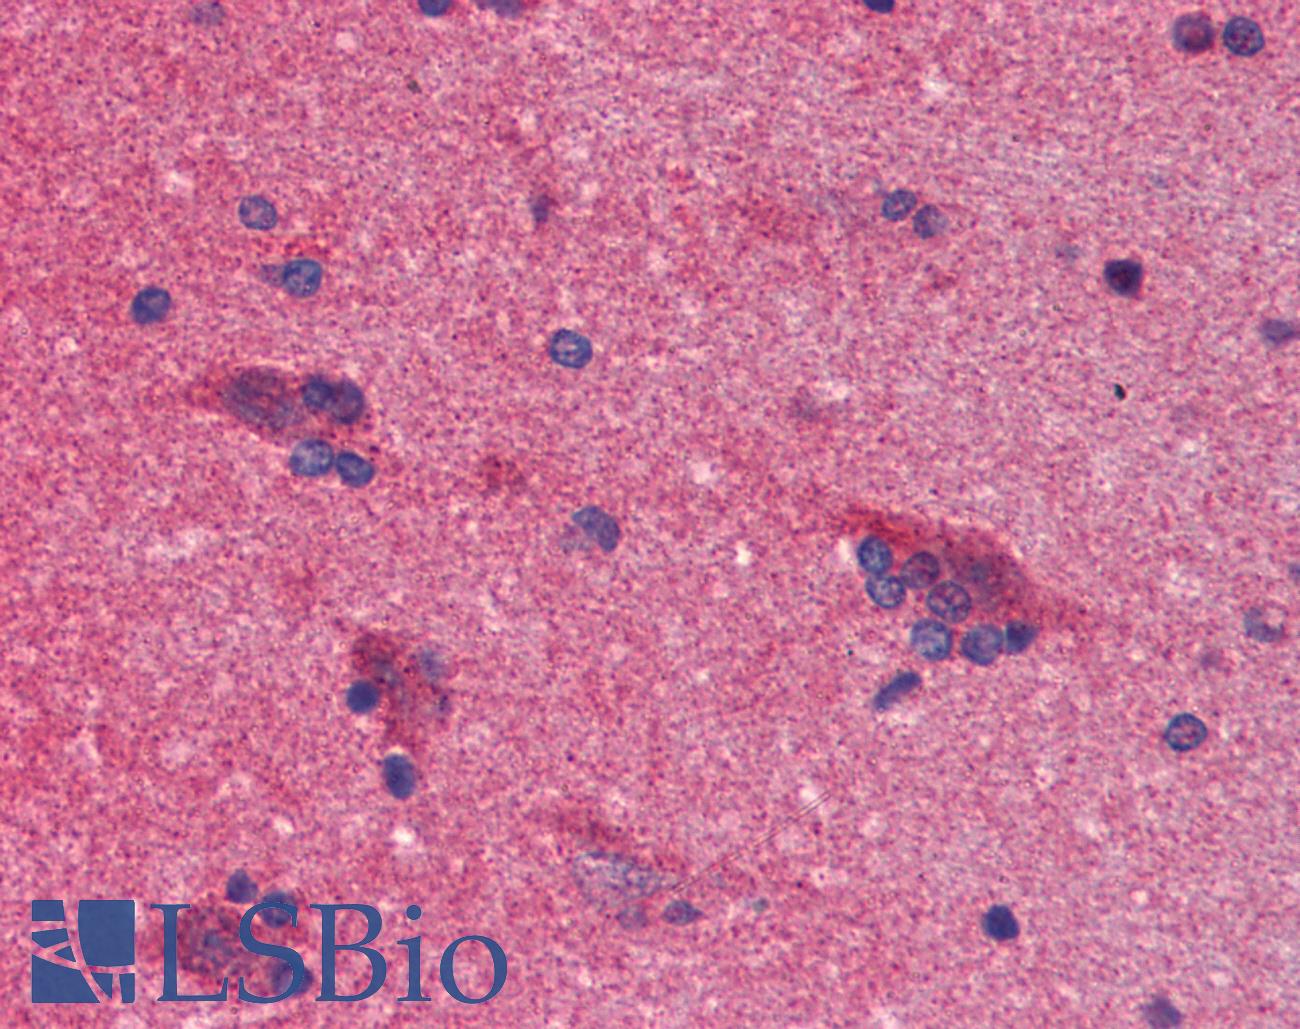 SNCA / Alpha-Synuclein Antibody - Anti-SNCA / Alpha-Synuclein antibody IHC of human brain, cortex. Immunohistochemistry of formalin-fixed, paraffin-embedded tissue after heat-induced antigen retrieval. Antibody concentration 10 ug/ml.